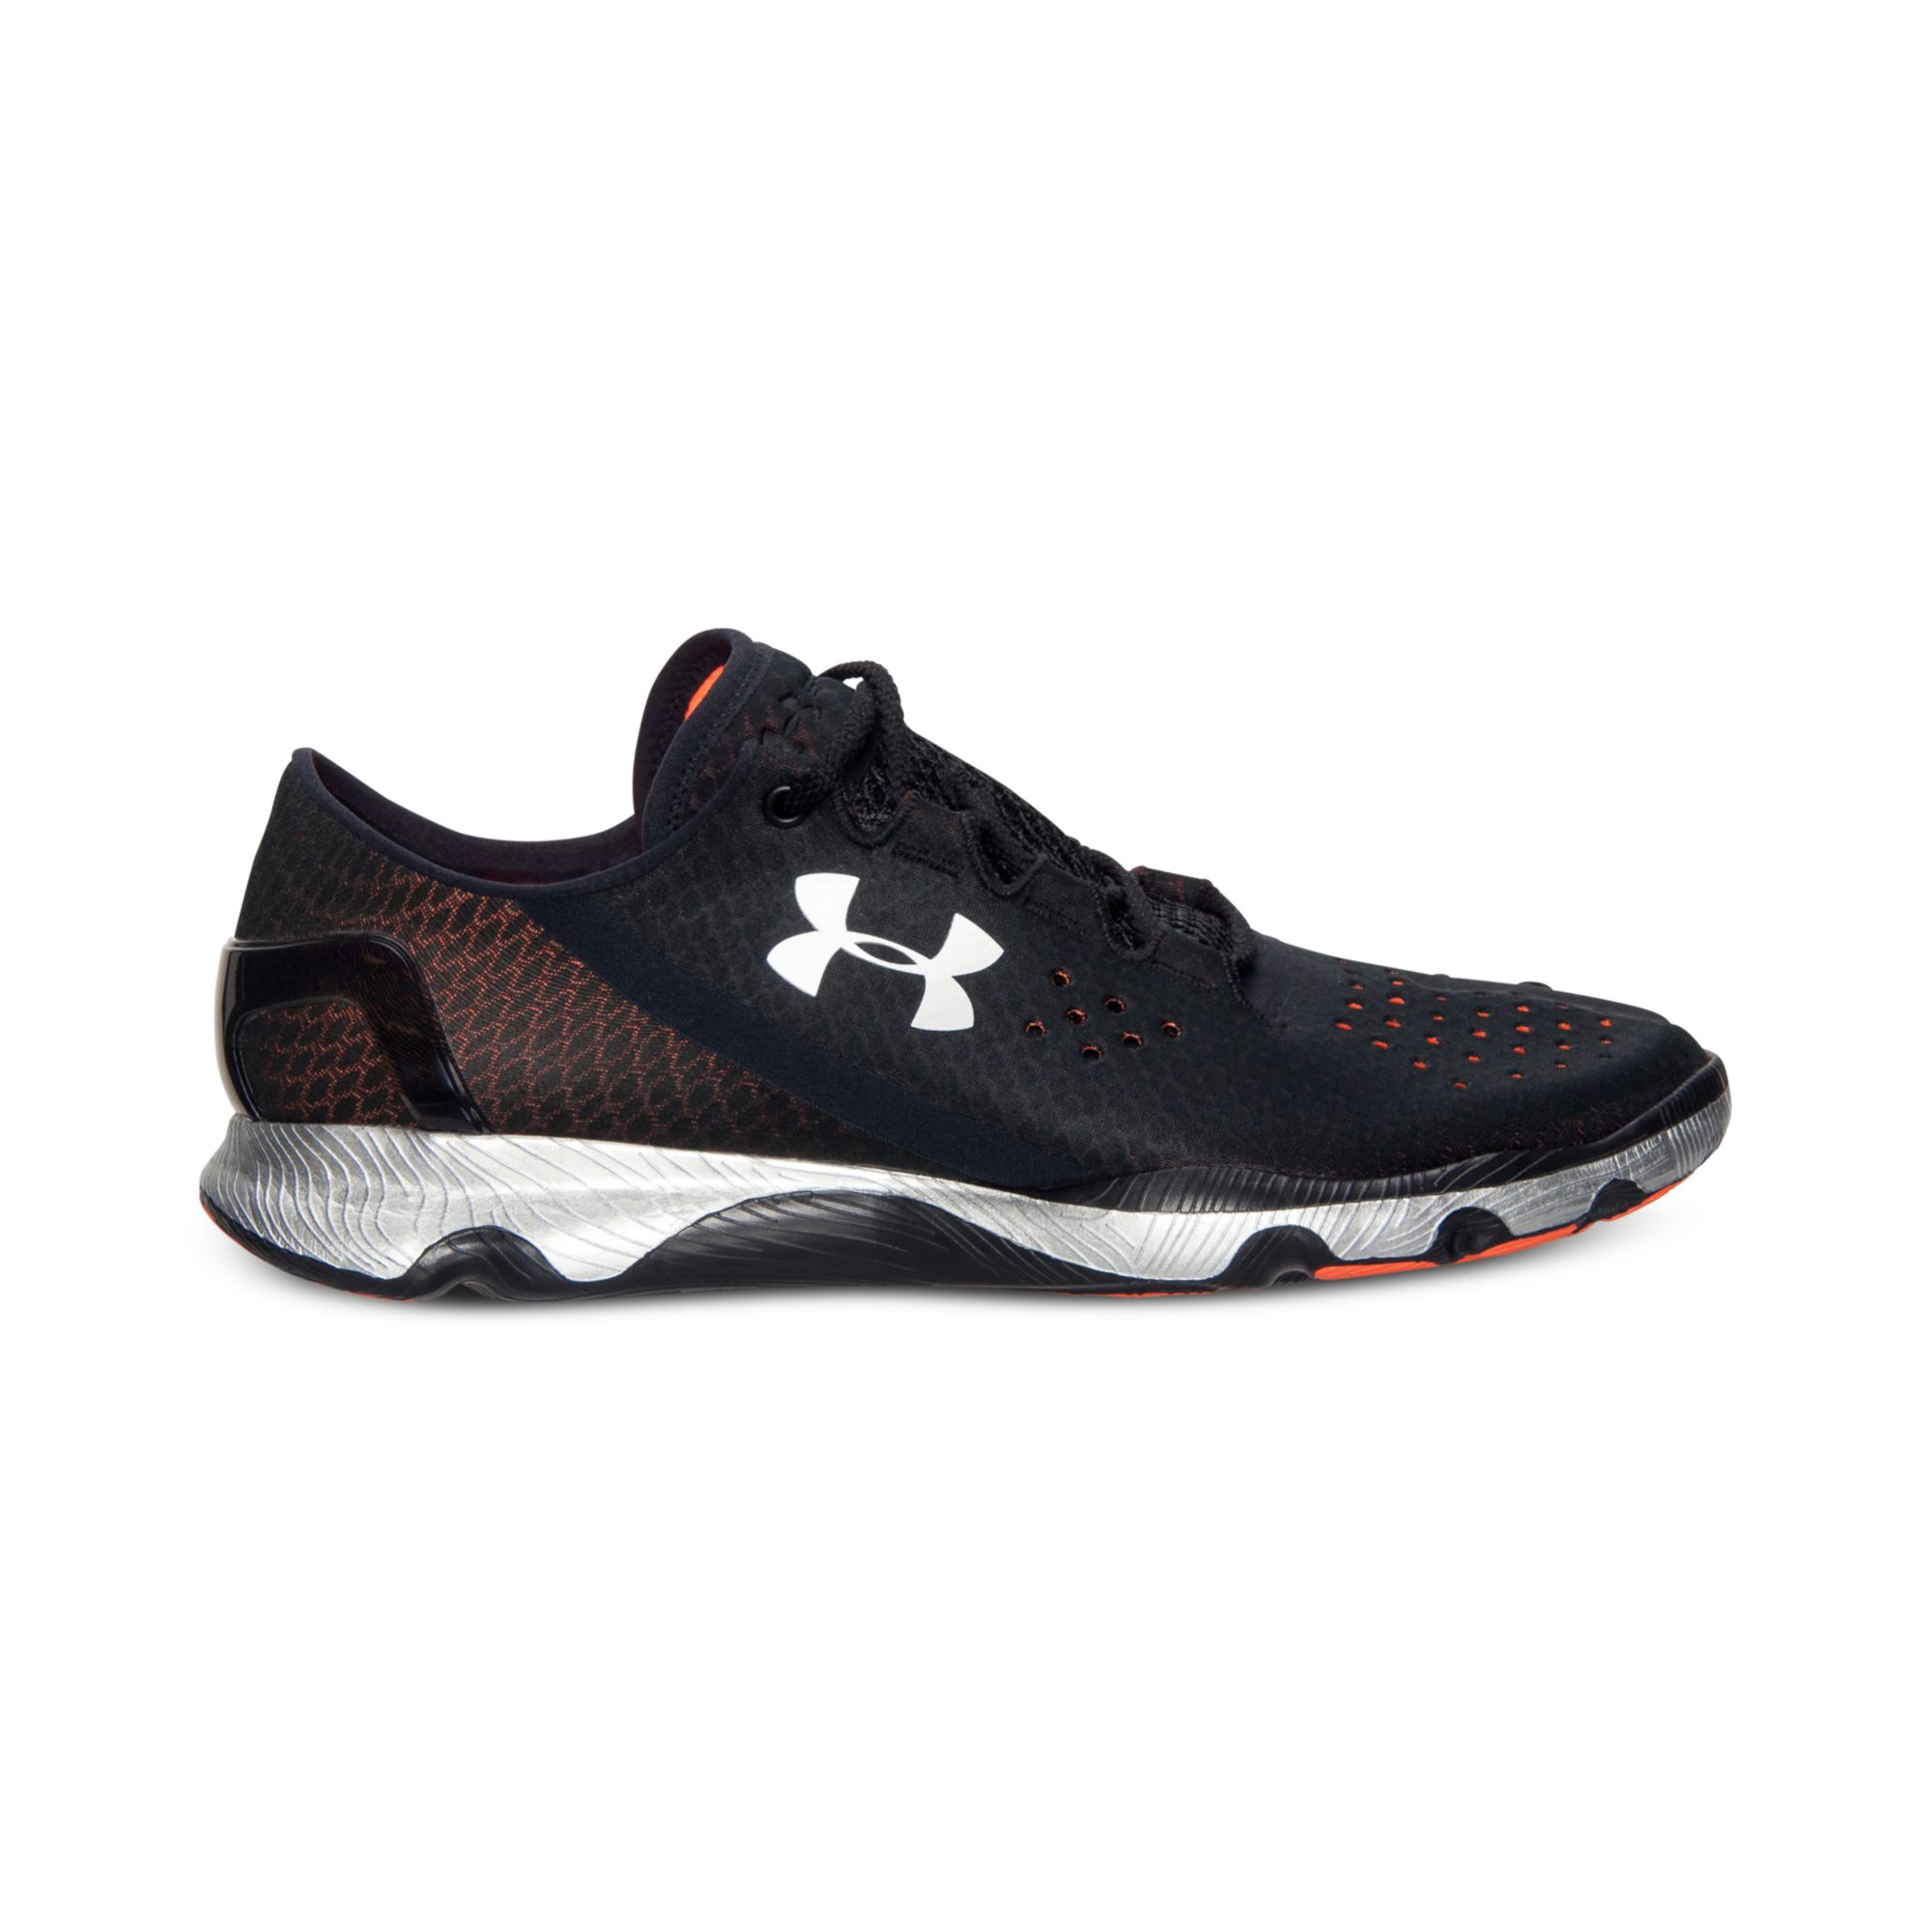 Lyst - Under Armour Mens Speedform Running Sneakers From Finish Line in